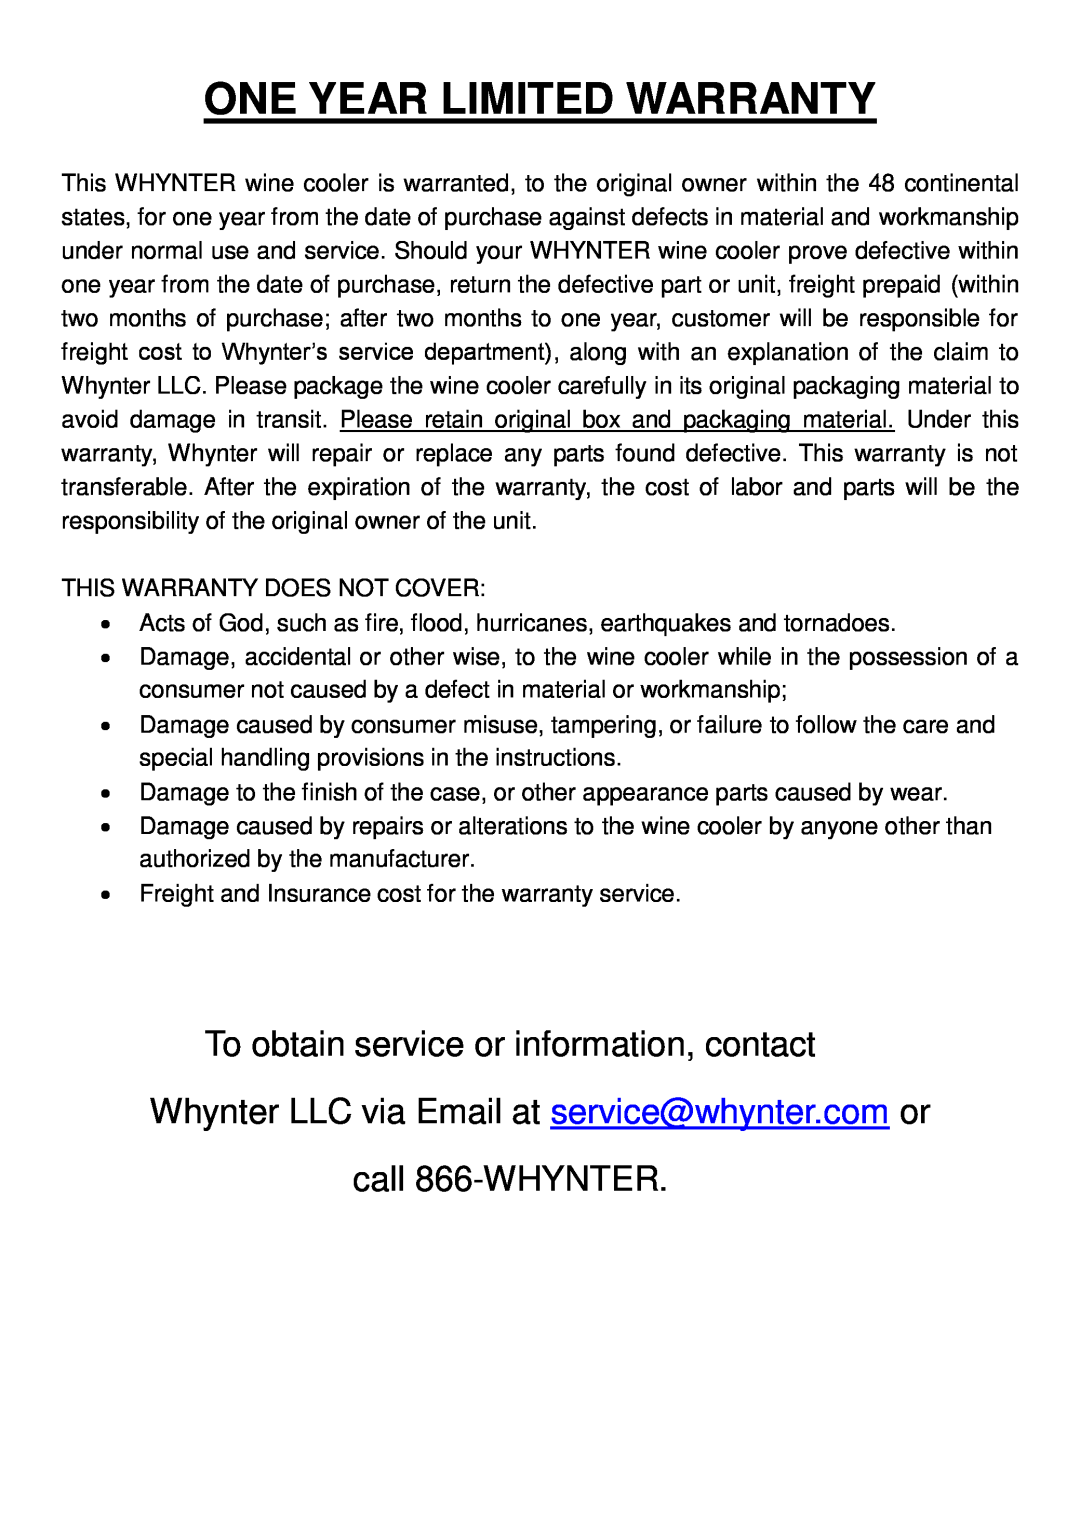 Whynter WC-321DD instruction manual To obtain service or information, contact, One Year Limited Warranty 